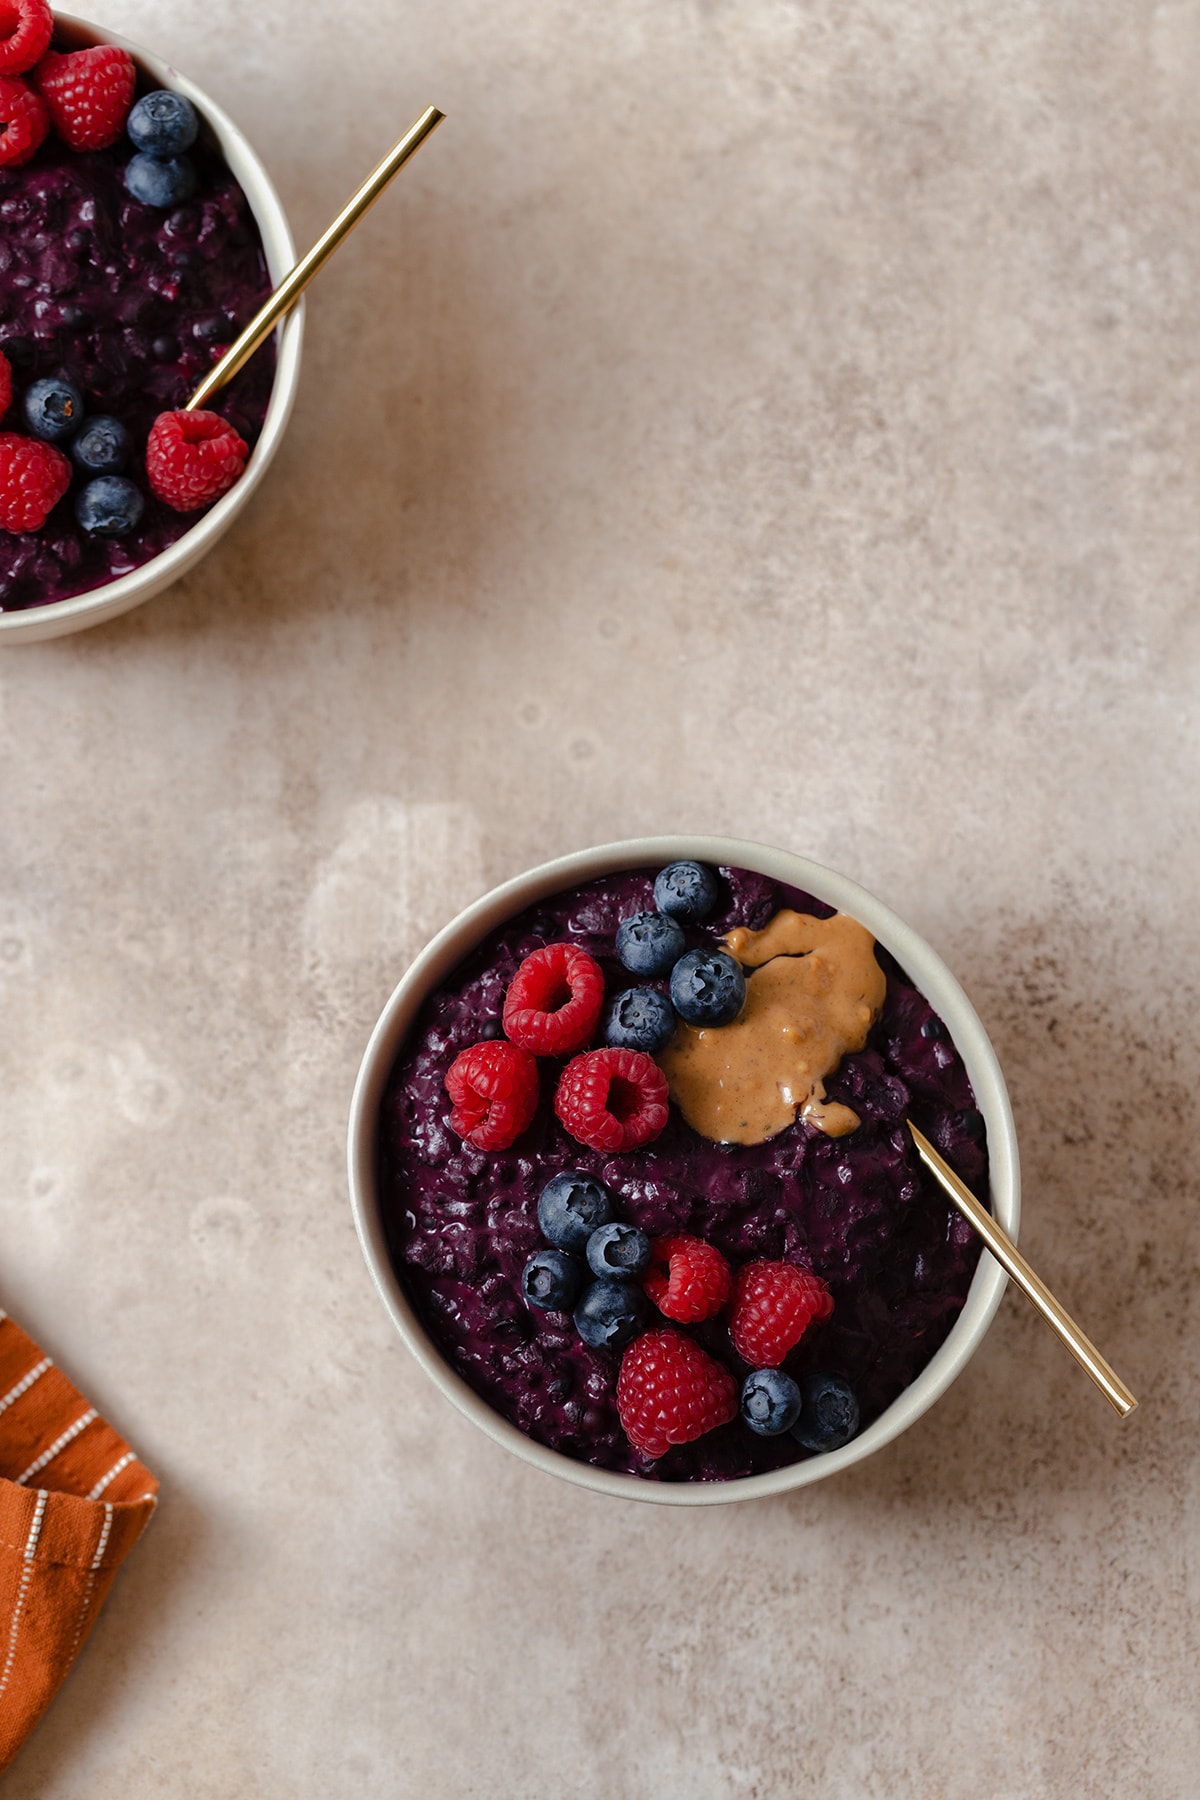 A photo of two beige bowls on a beige background. Bowls full of purple maqui berry oatmeal. Topped with raspberries, blueberries, and peanut butter.